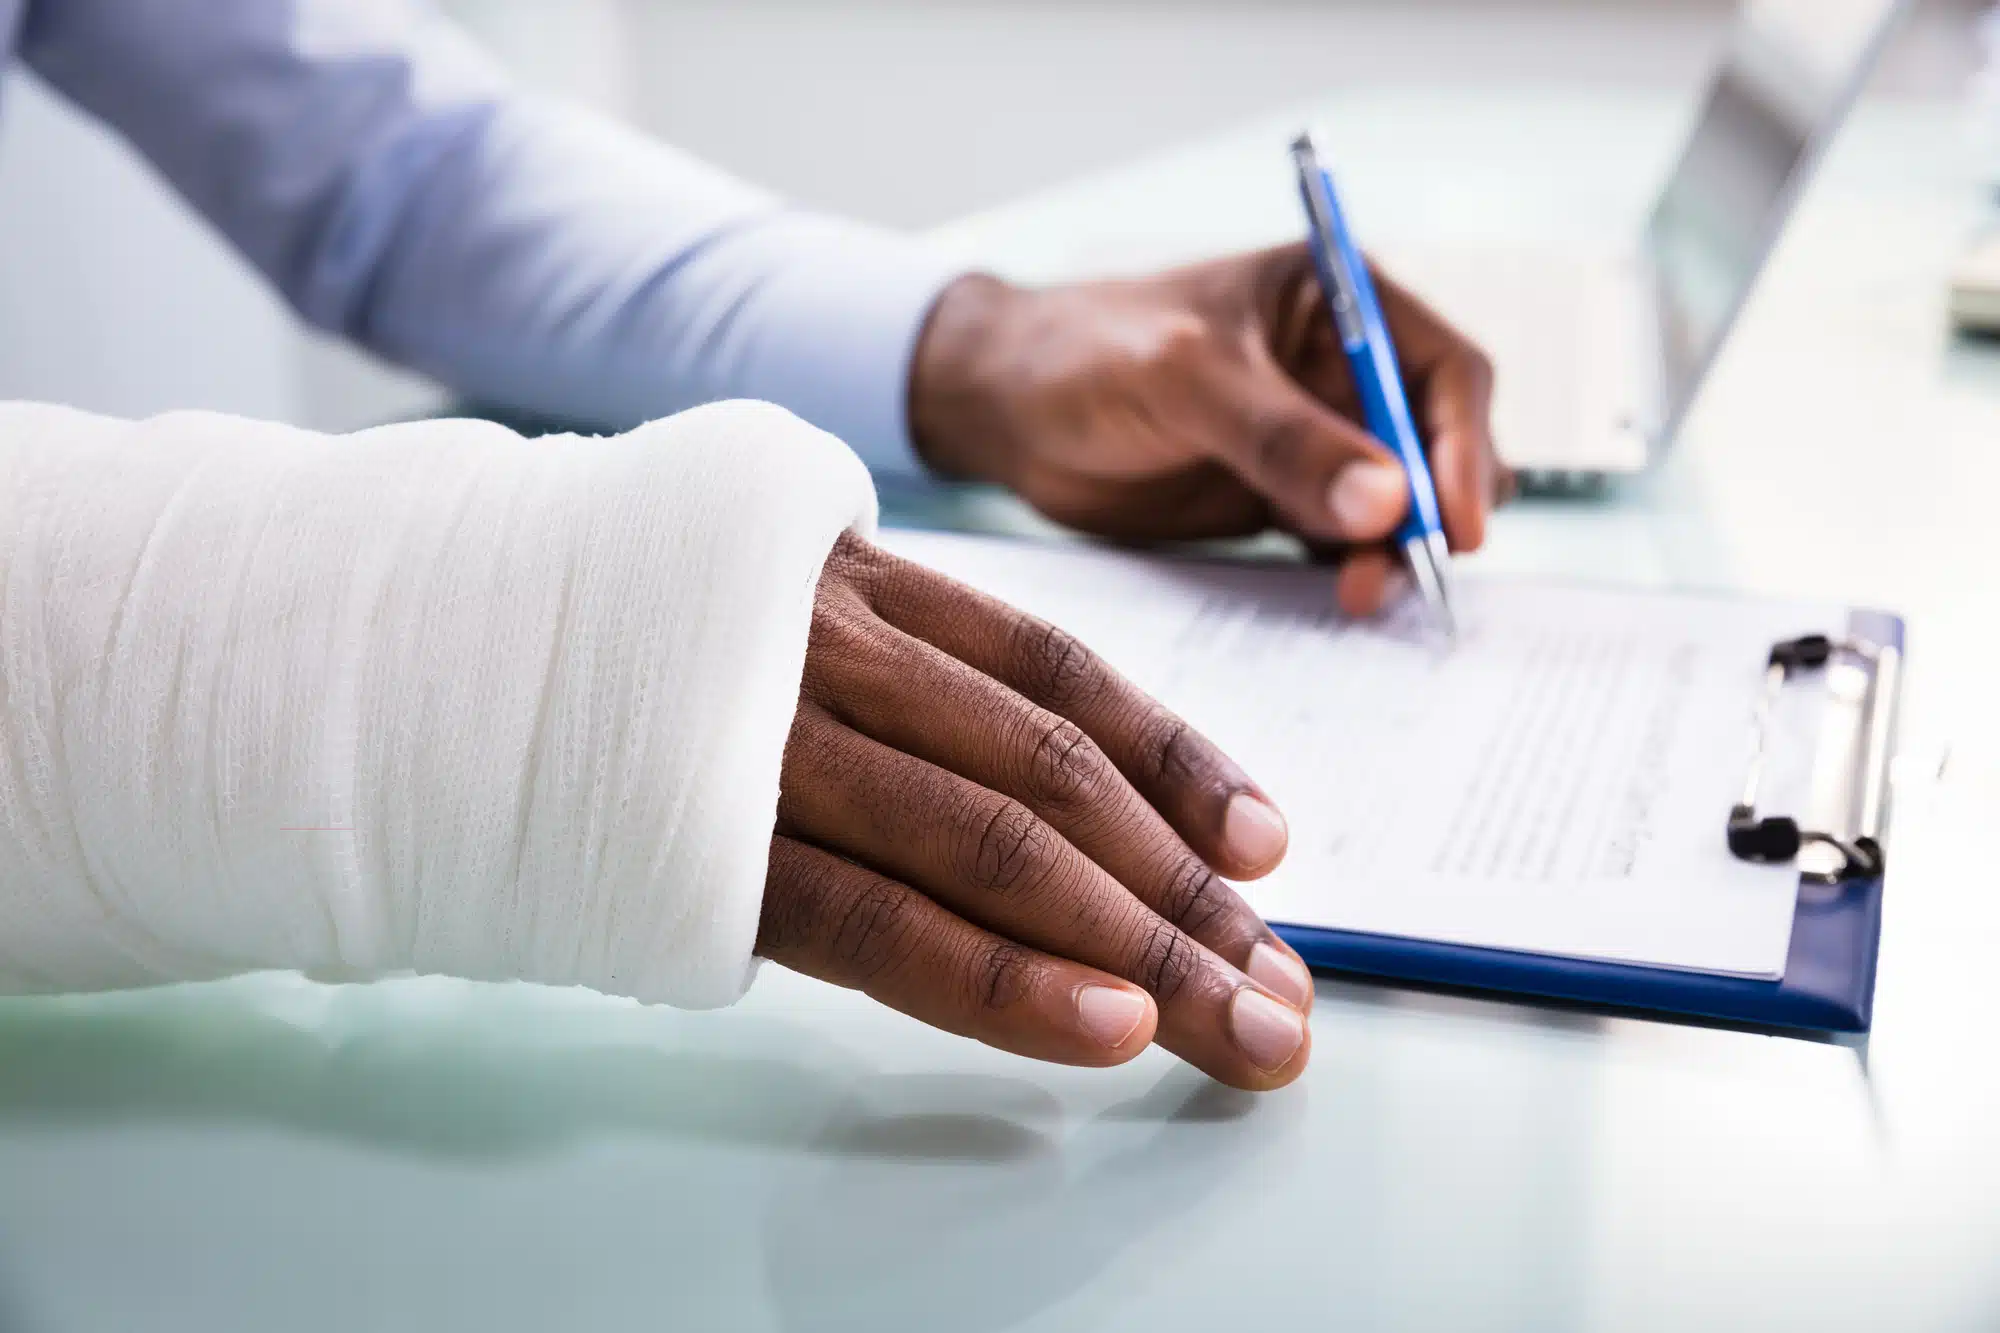 Learn more about the best workers comp insurance for small business; image of someone filling out insurance form with a bandaged hand